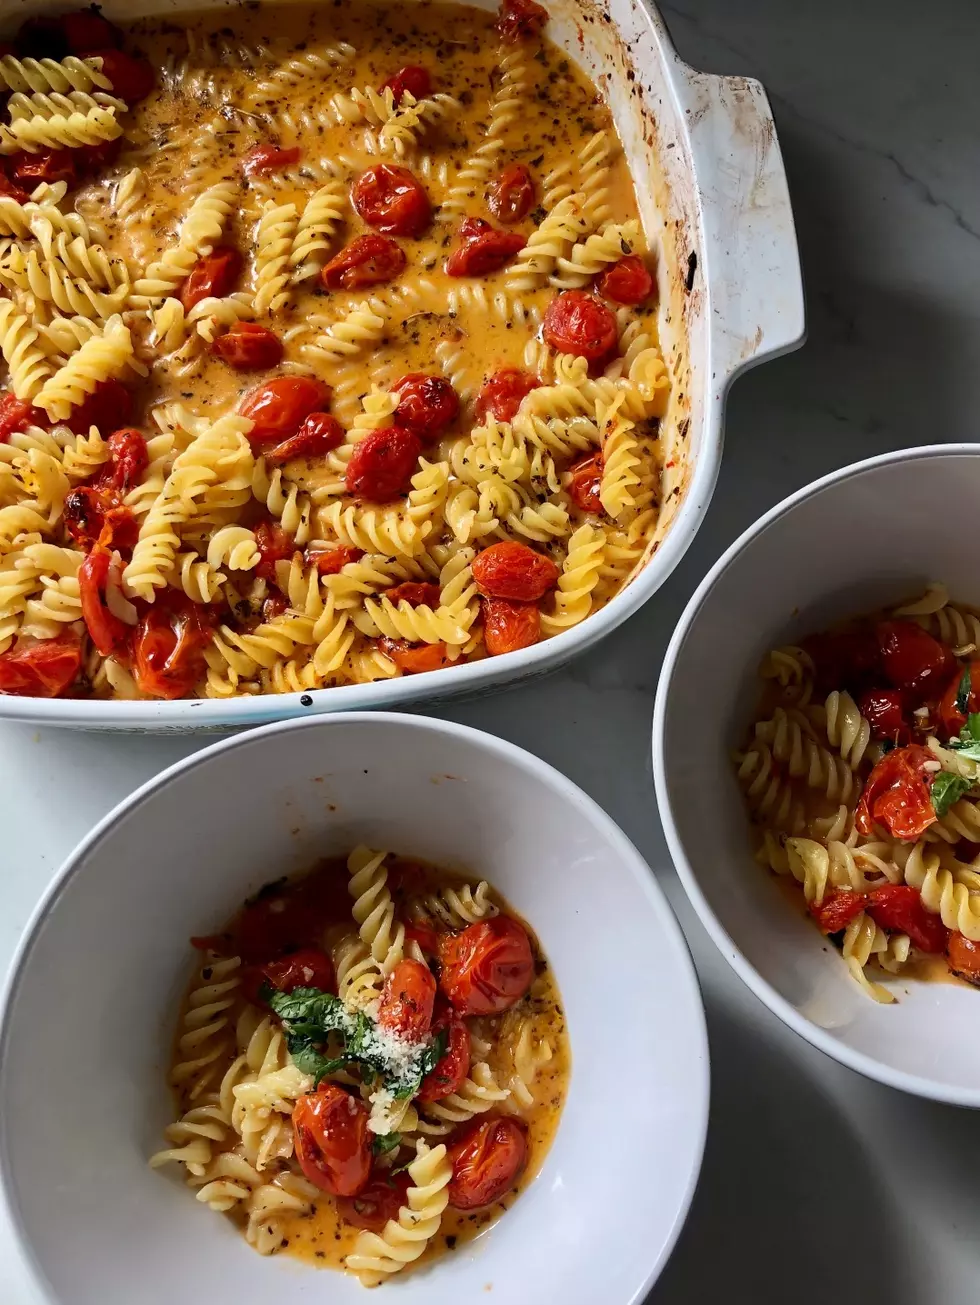 We Made The Viral Feta Pasta Vegan, with These Simple Dairy-Free Swaps